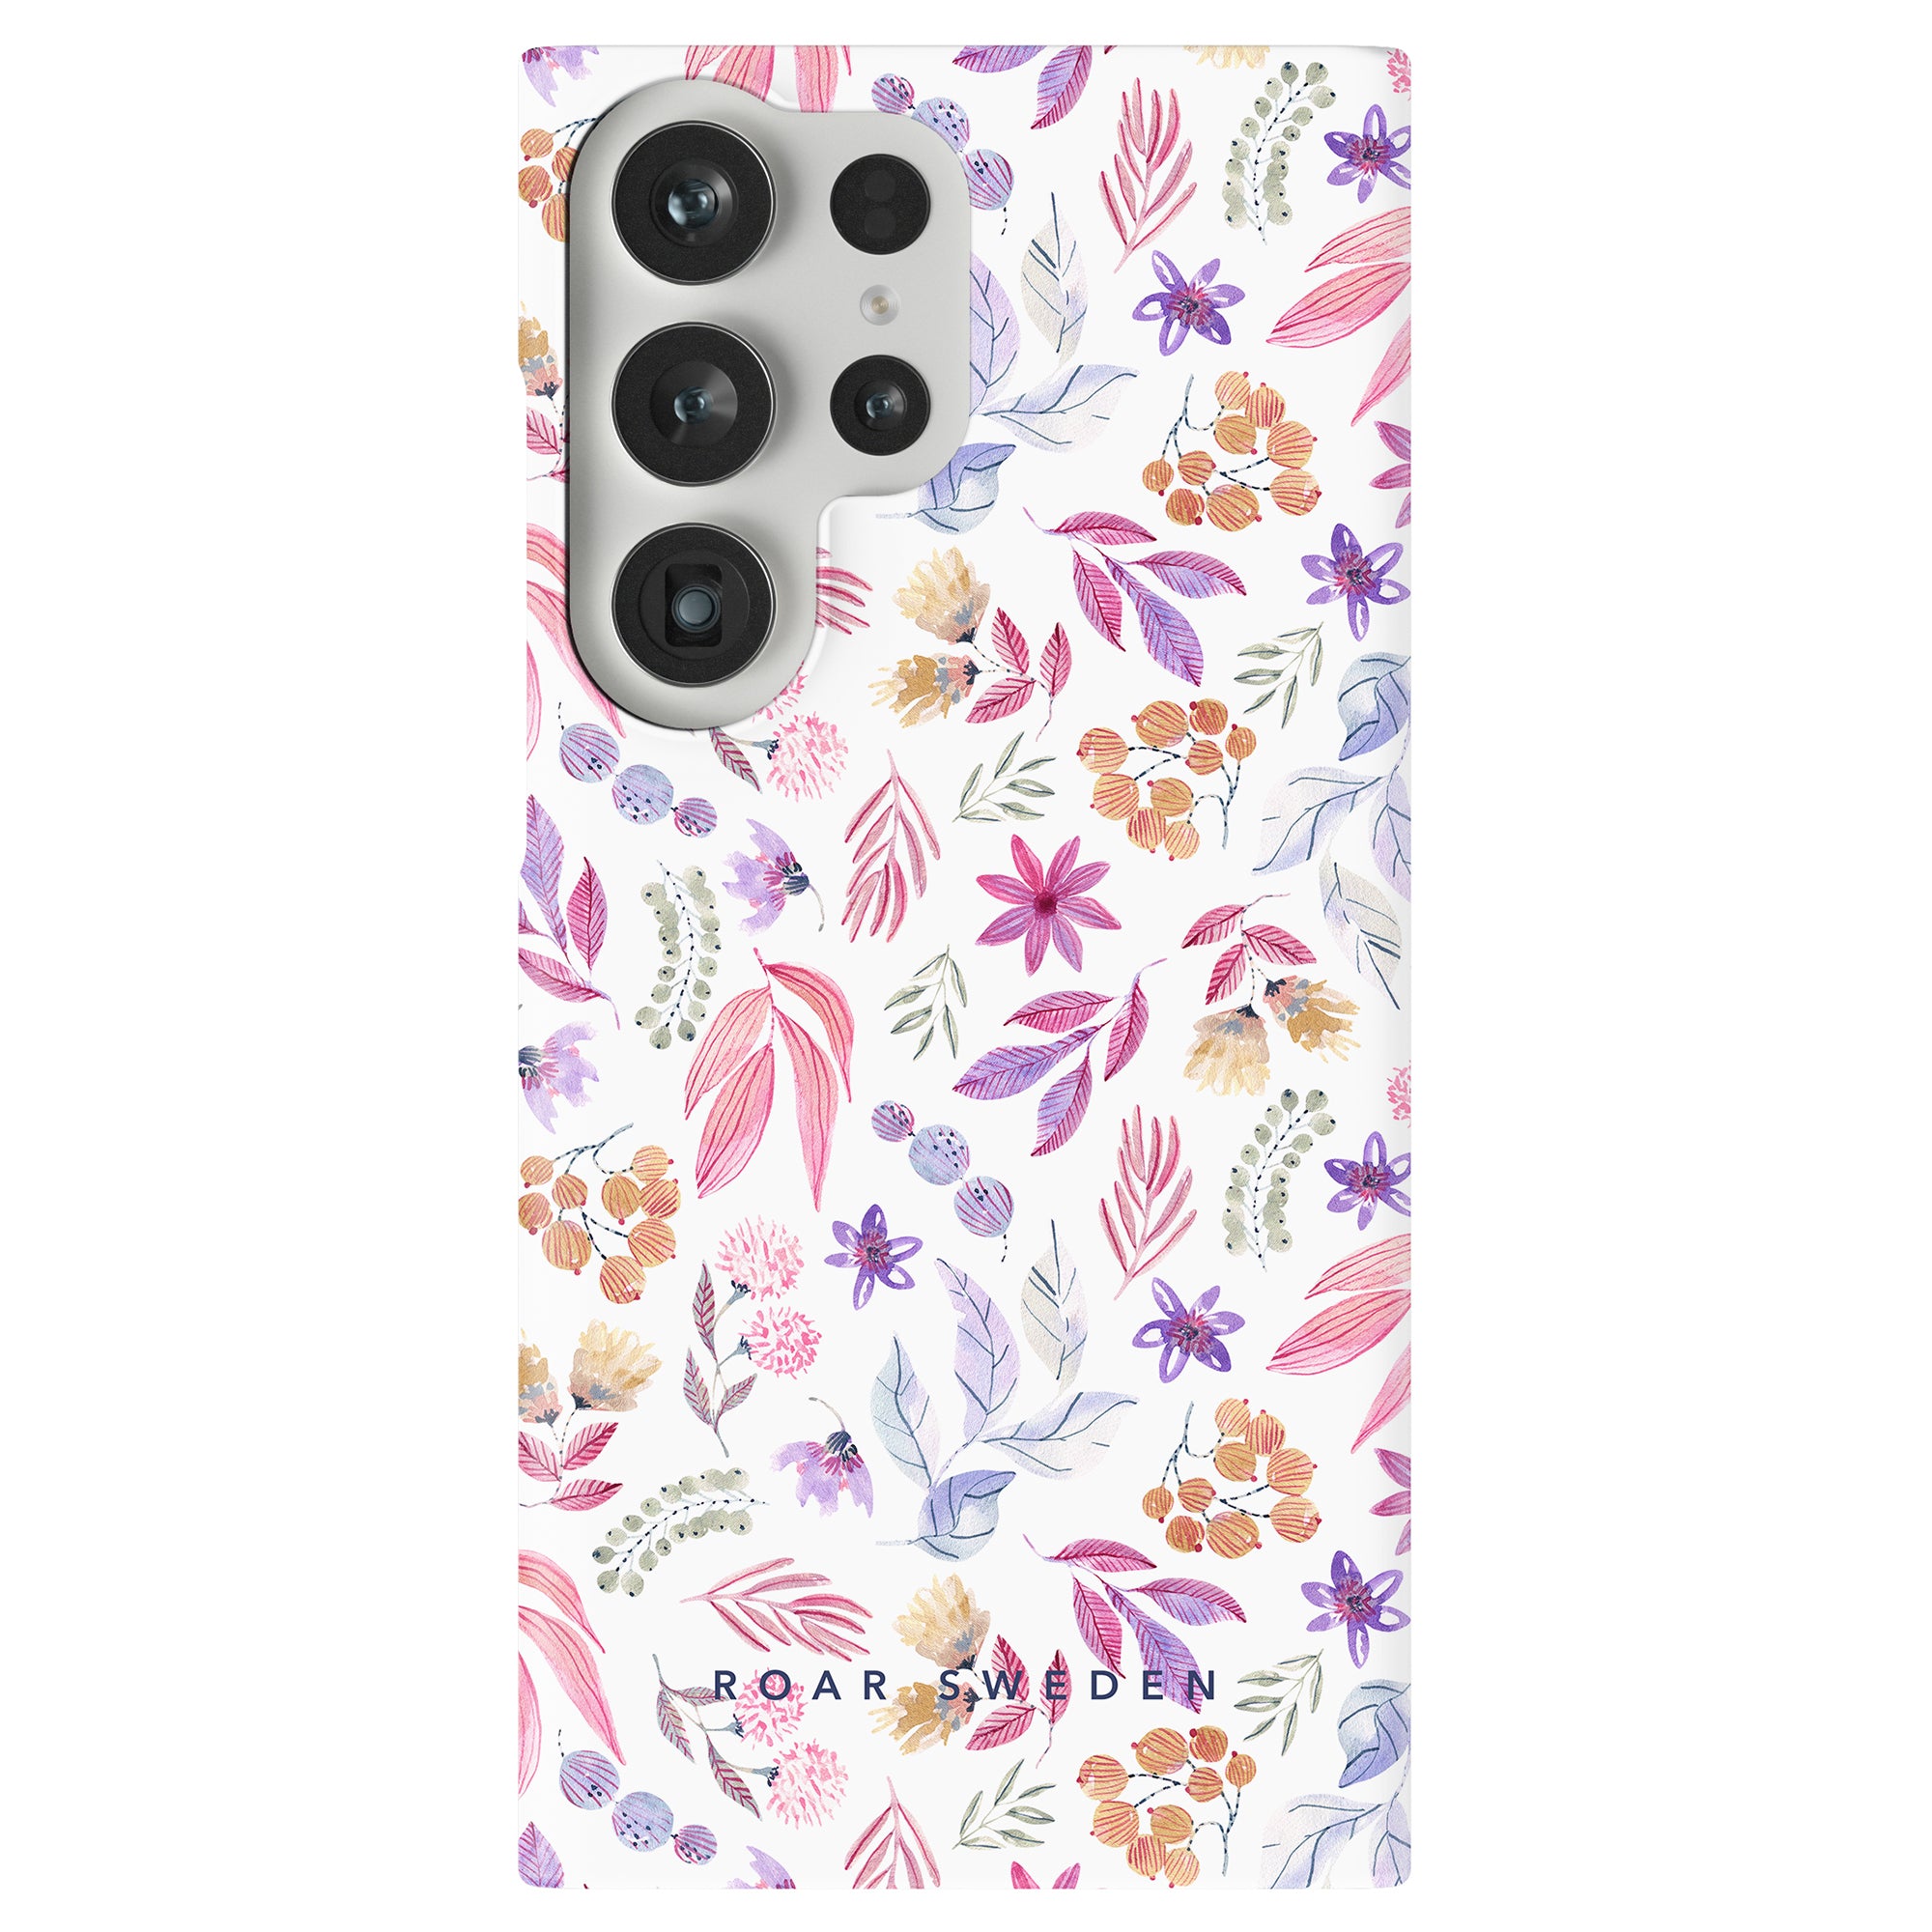 A smartphone with a floral-patterned case, part of the Flower Power - Slim case, featuring purple, pink, and orange flowers. The brand "Roar Sweden" is printed at the bottom. The phone has a large rear camera module.
